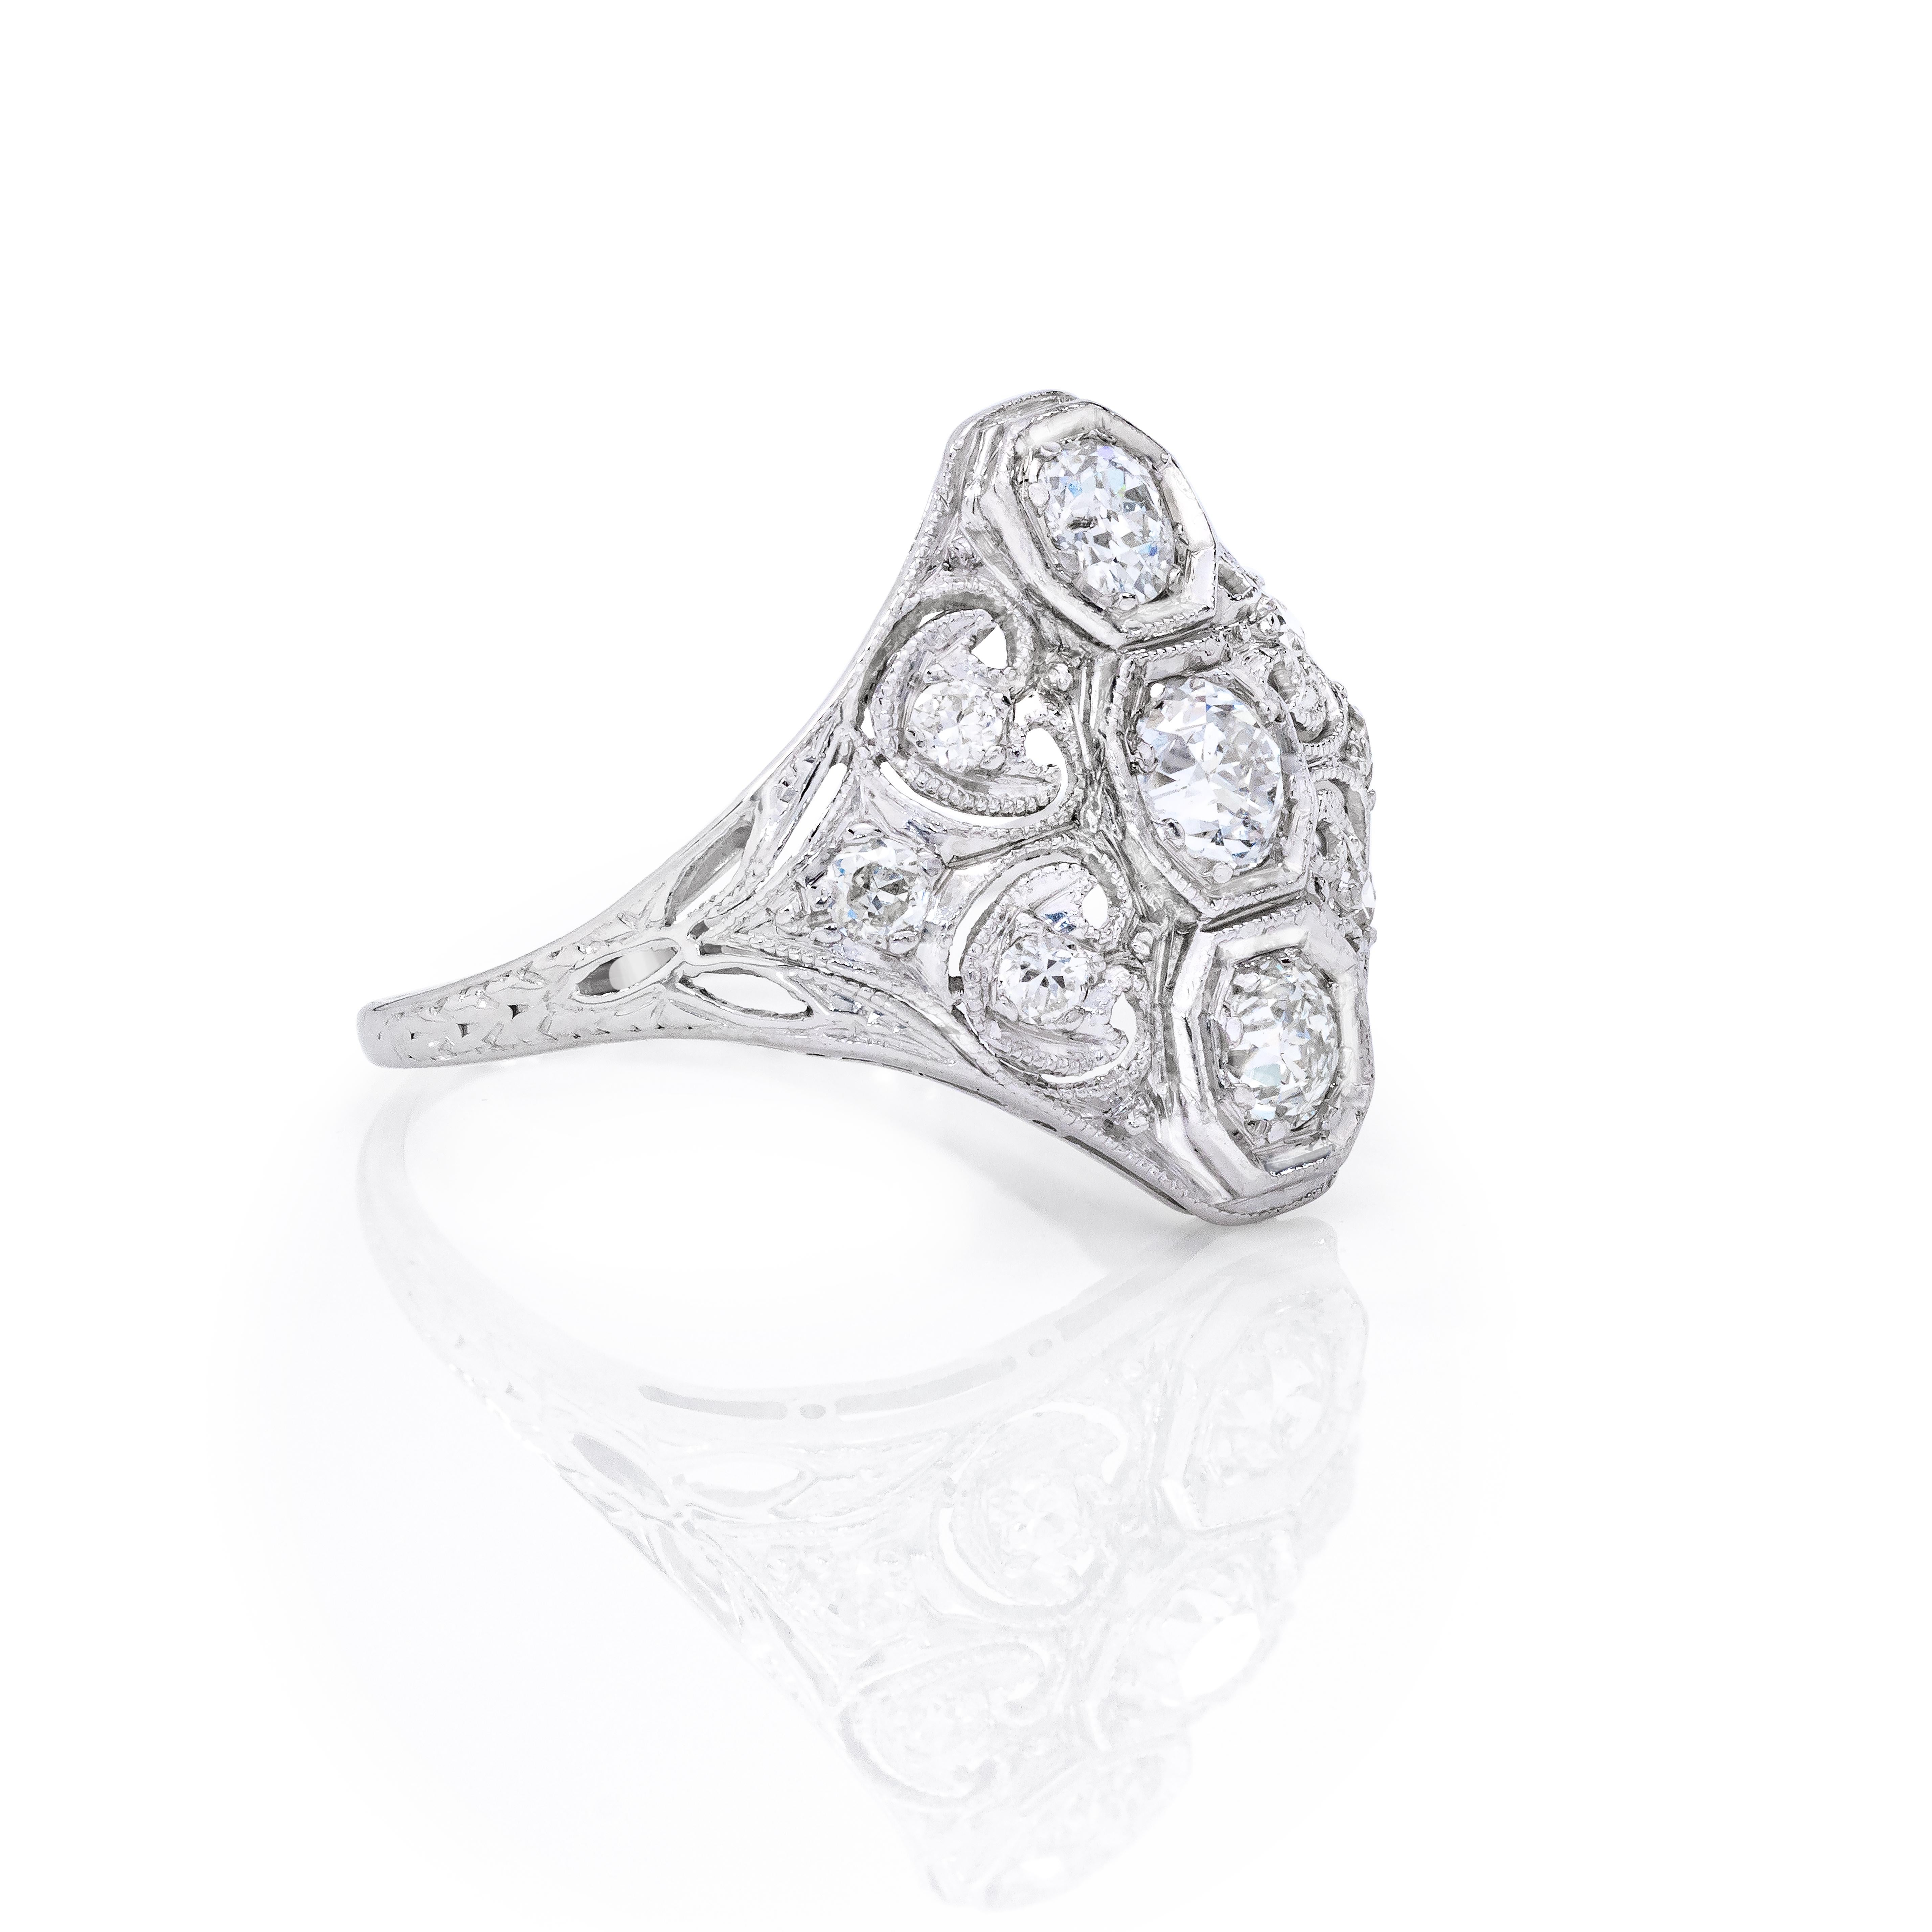 This is a gorgeous and neverendingly stylish ring that is incredibly comfortable to wear.

Ring Details:

3/4 Carat of Diamonds
Set in Platinum
Overall weight:  3.2 grams

Measurements:  16.4 mm down the finger

Ring Size:  5 4/3
*Resizable upon